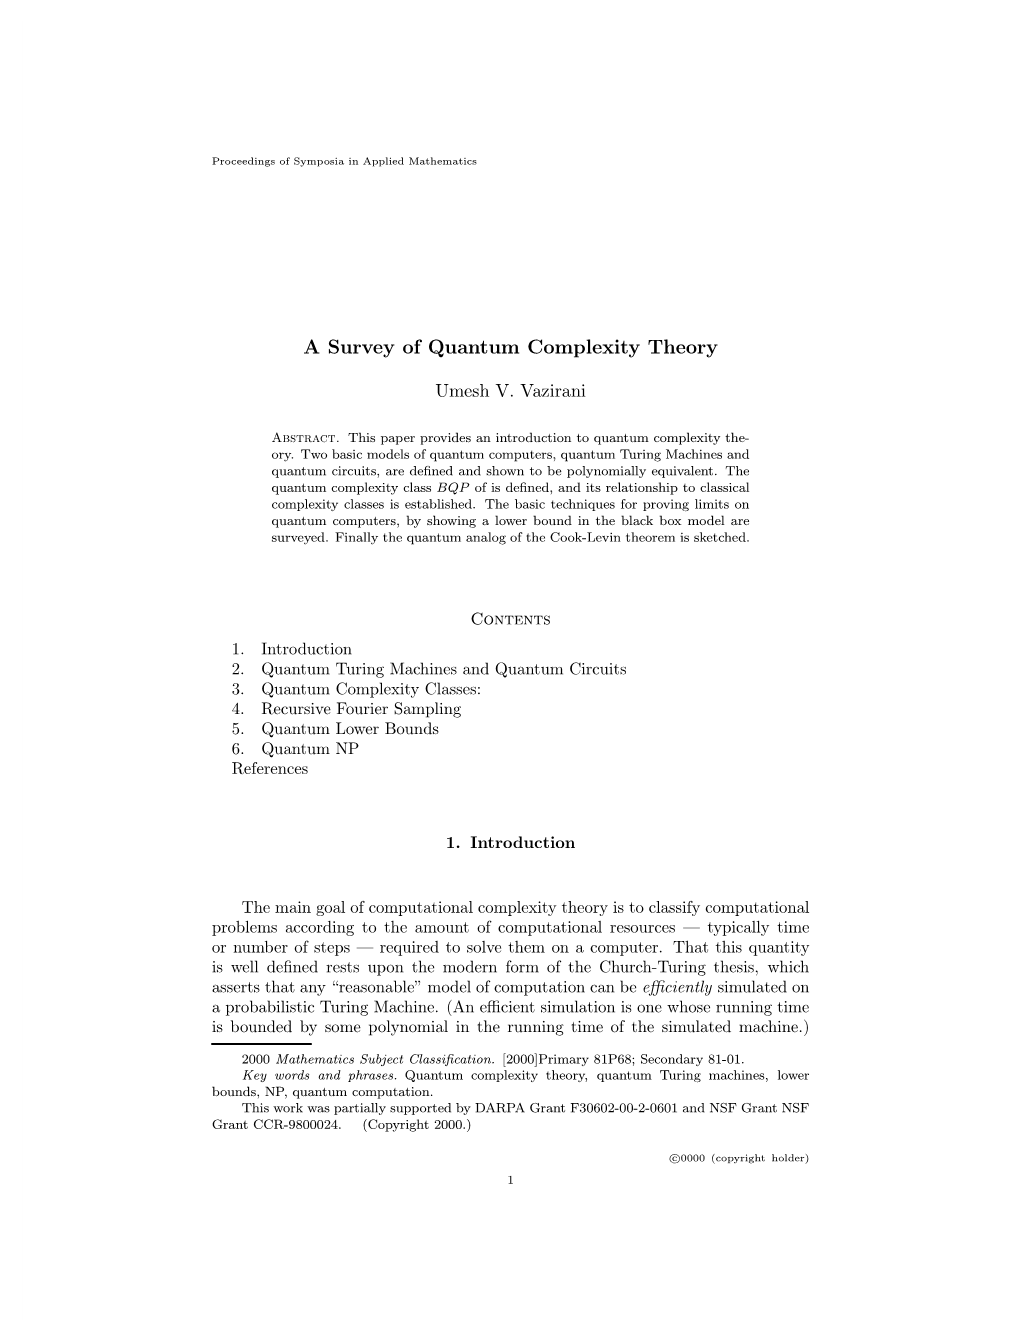 A Survey of Quantum Complexity Theory